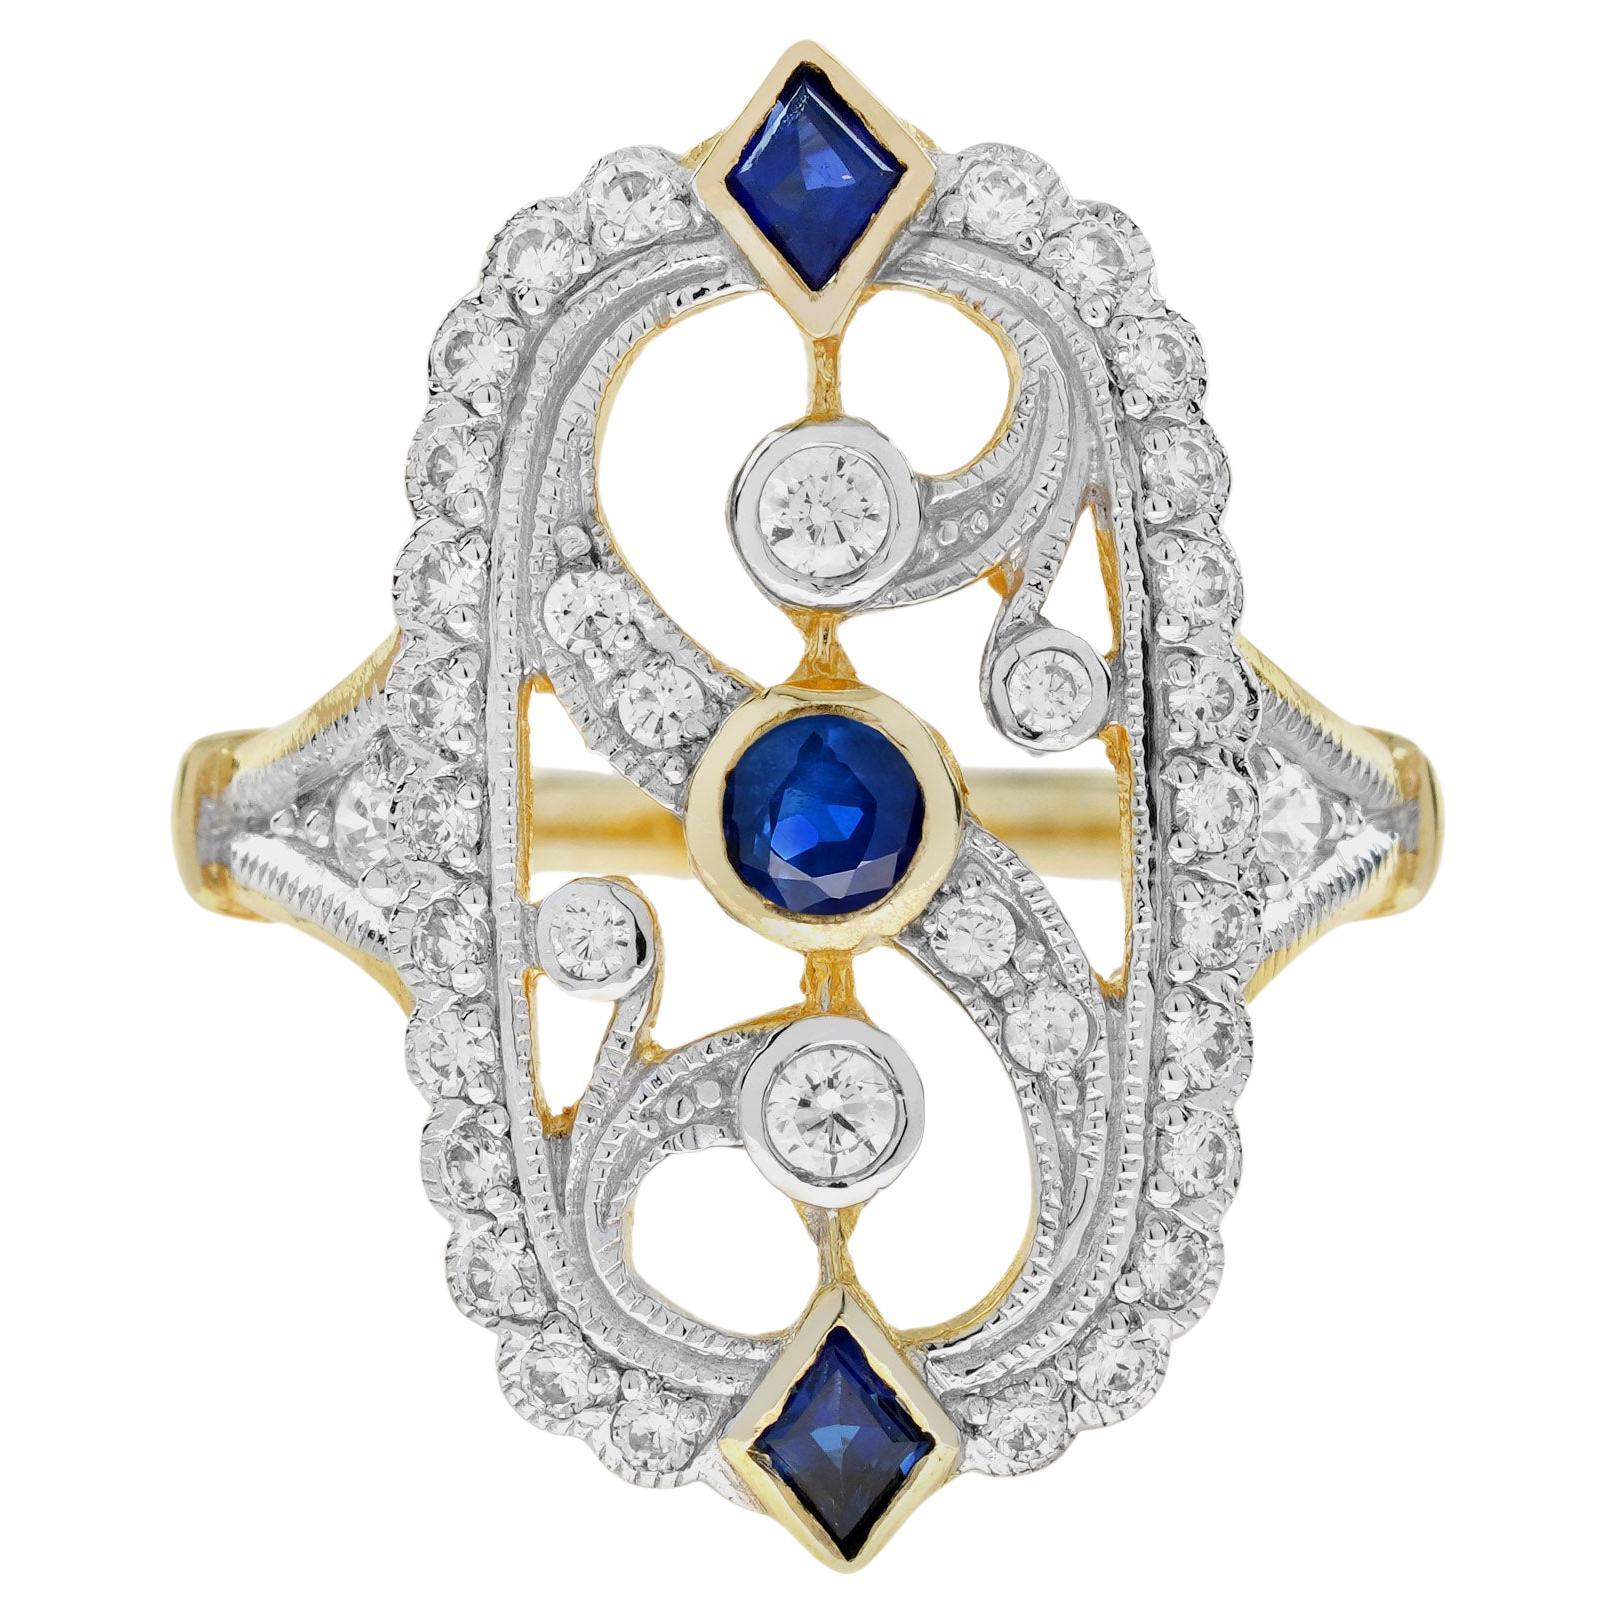 For Sale:  Blue Sapphire and Diamond Vintage Style Filigree Ring in 14K Two Tone Gold